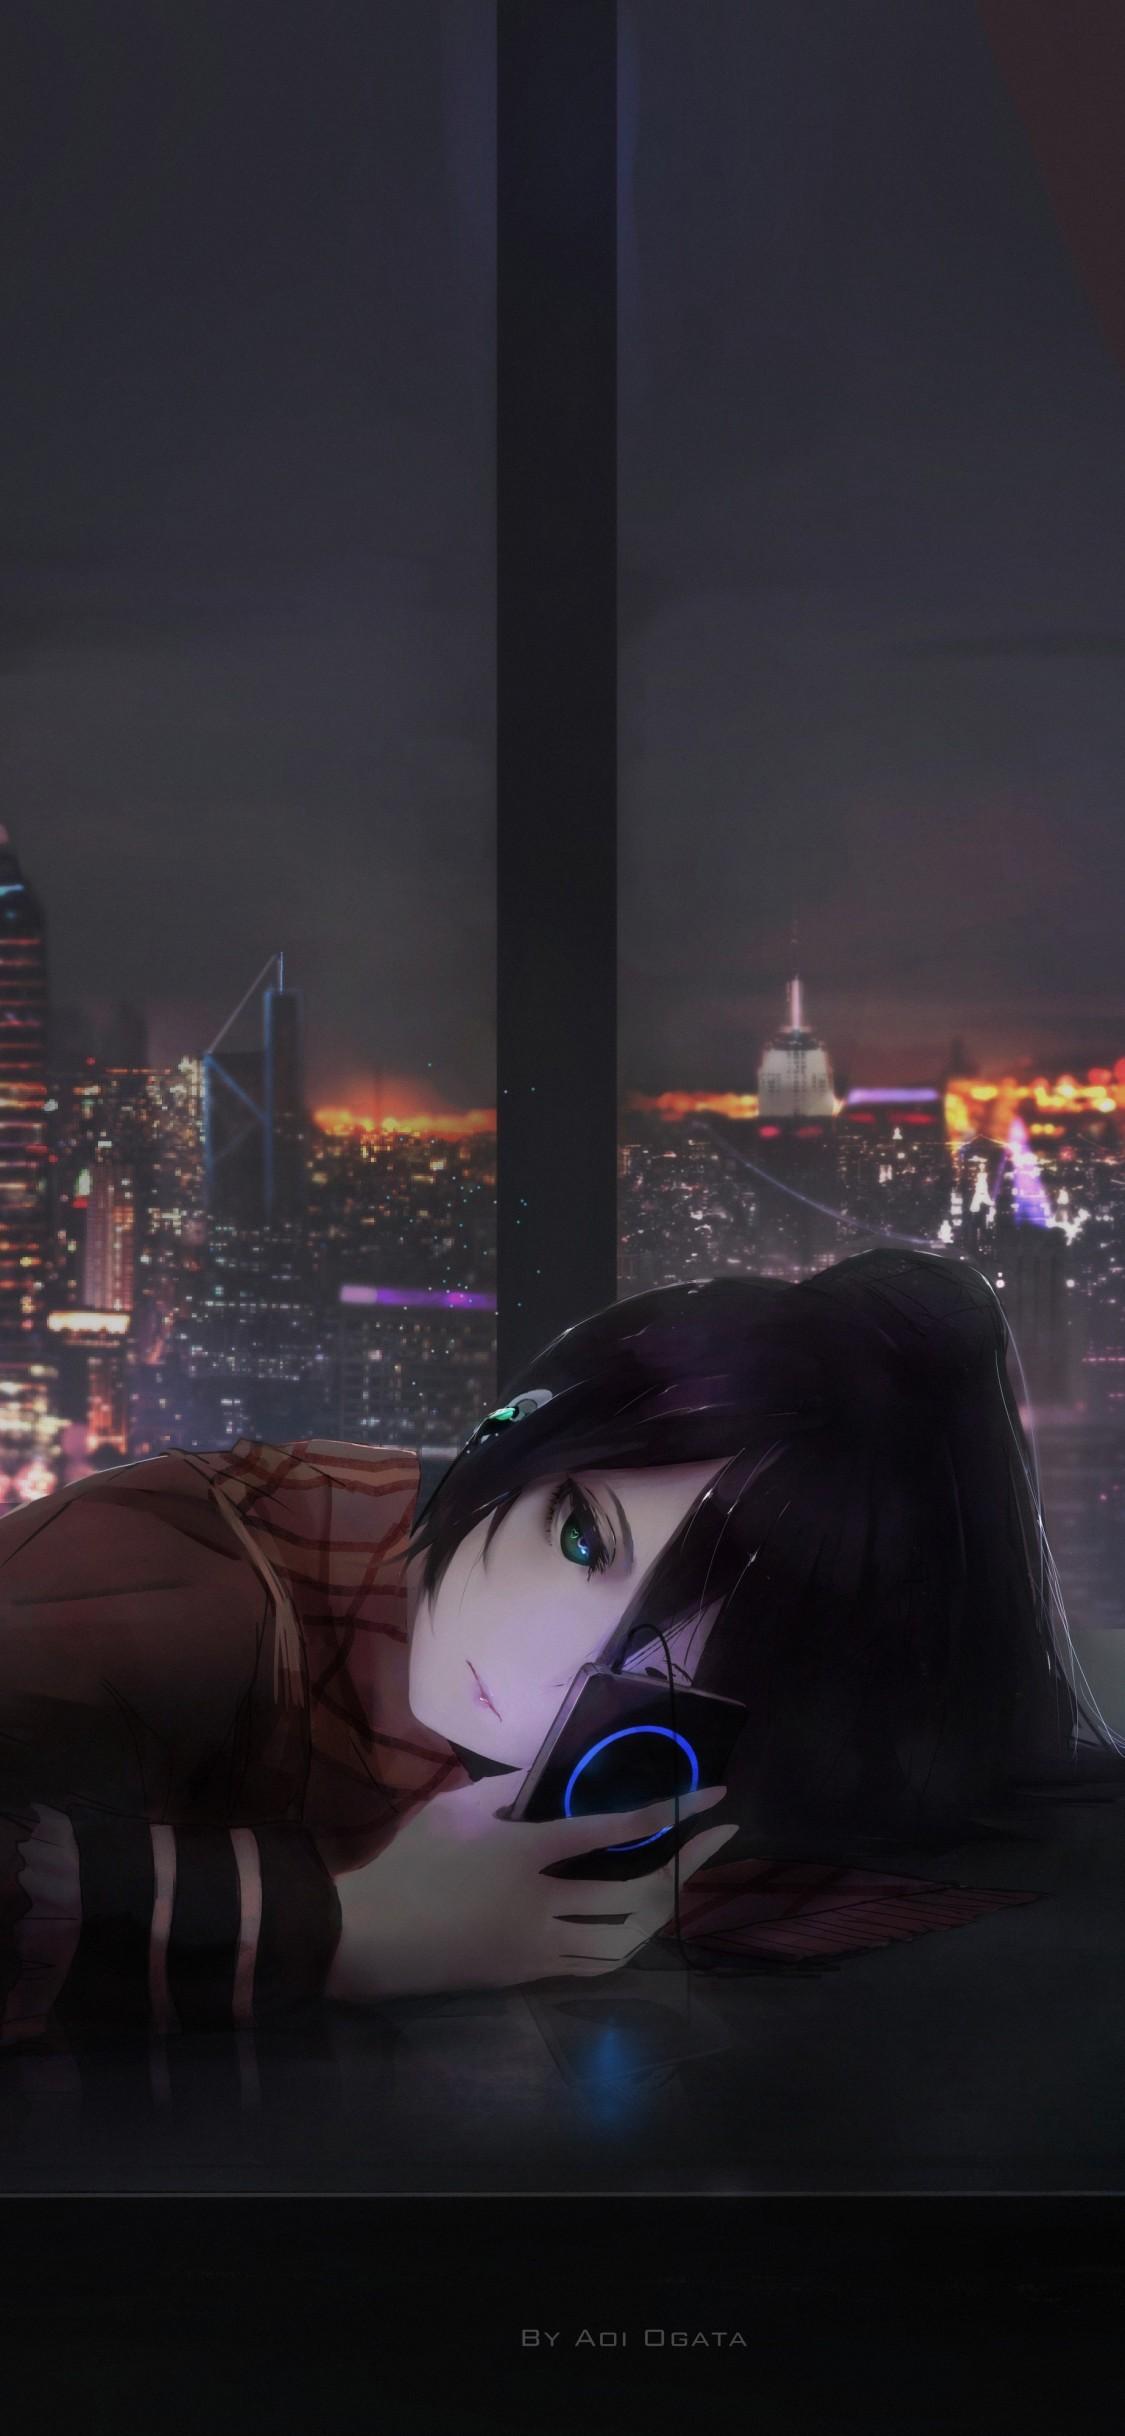 Download 1125x2436 Anime Girl, Depressed, Cityscape, Music, Scarf